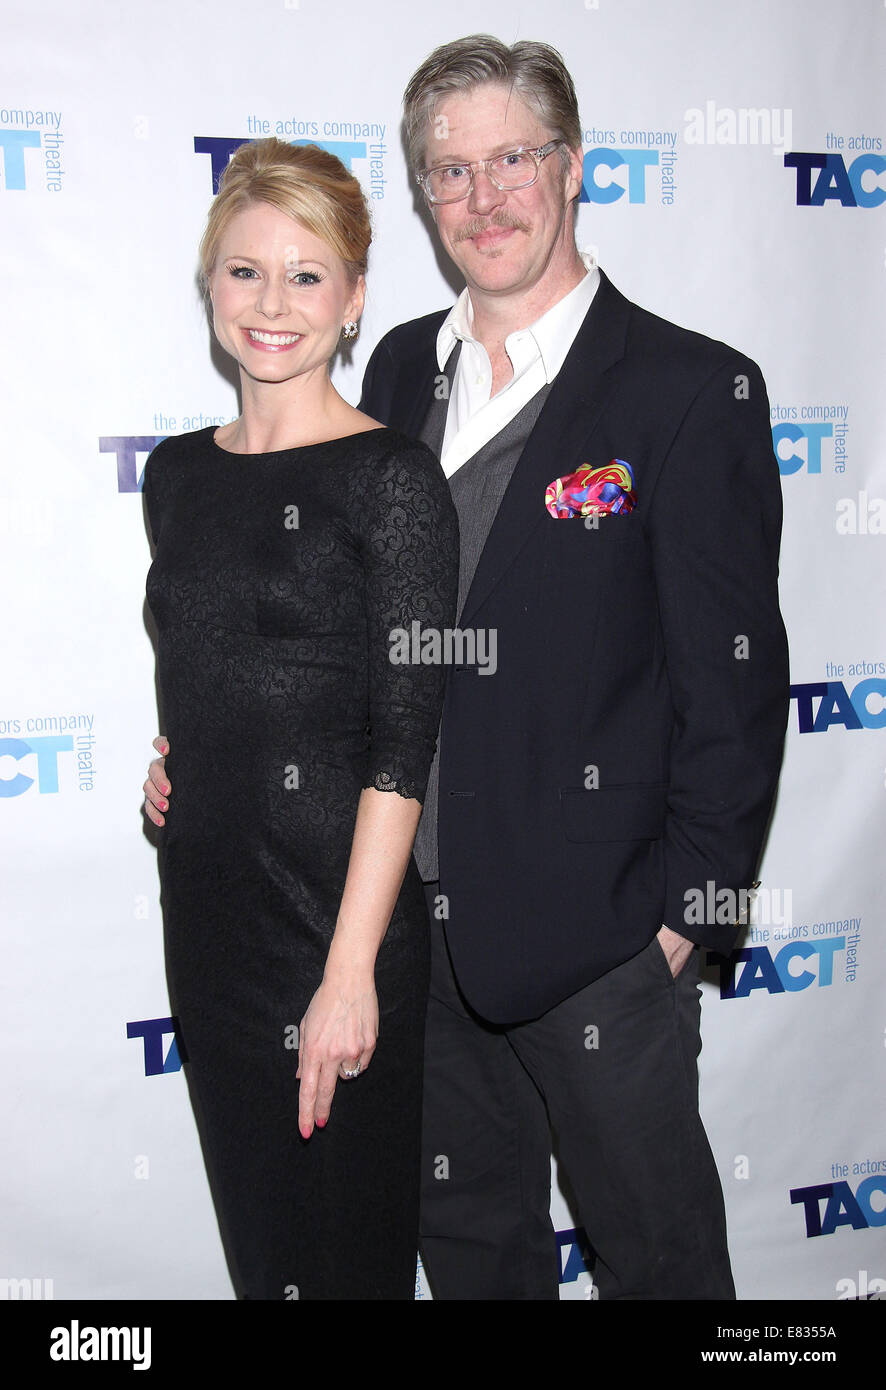 Opening night party for 'Beyond Therapy' at the Beckett Theatre - Arrivals.  Featuring: Liv Rooth,Karl Kenzler Where: New York, New York, United States When: 25 Mar 2014 Stock Photo